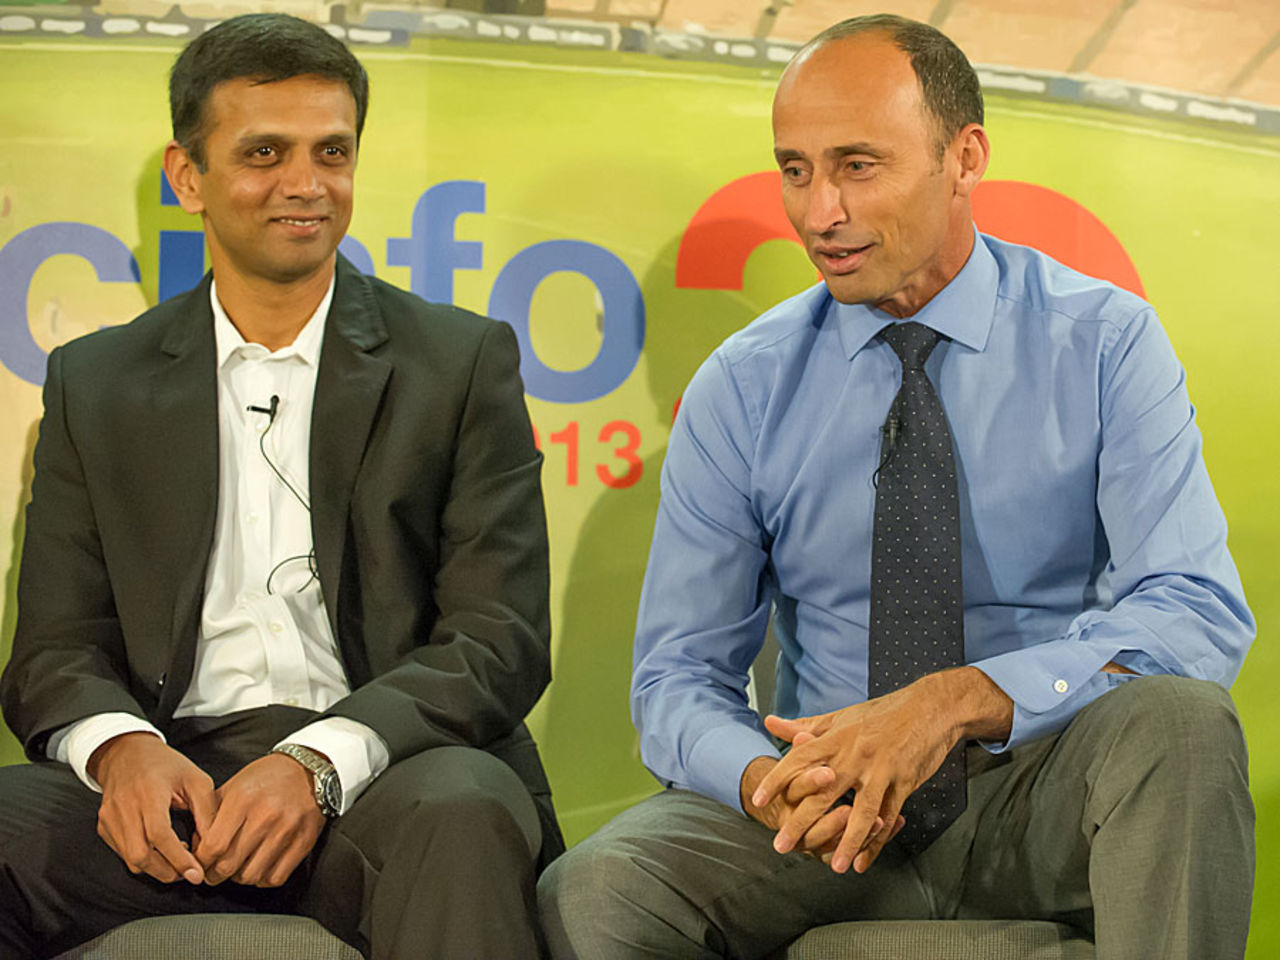 Rahul Dravid and Nasser Hussain at a panel discussion at the first ESPNcricinfo for Cricket Summit, London, August 19, 2013